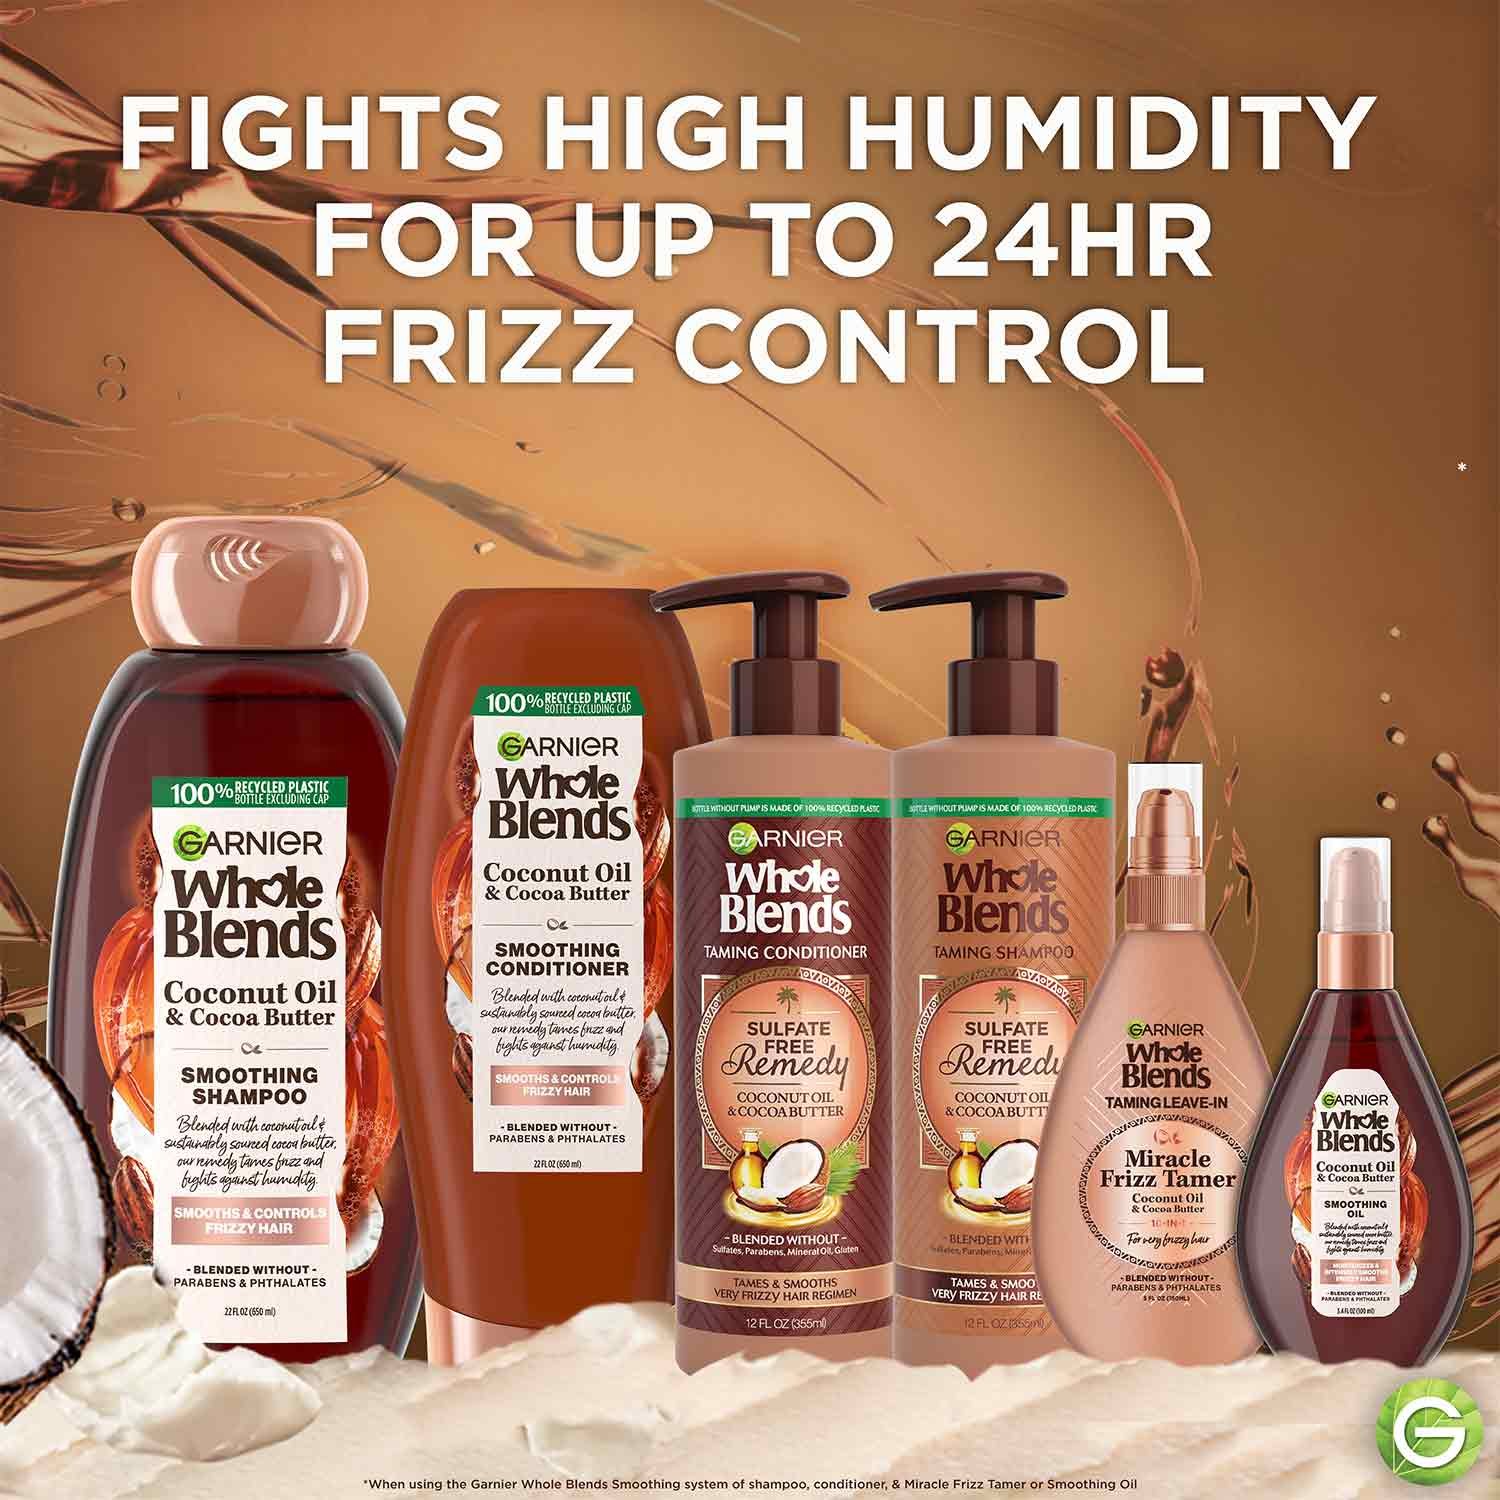 Fights high humidity for up to 24 hours of frizz control